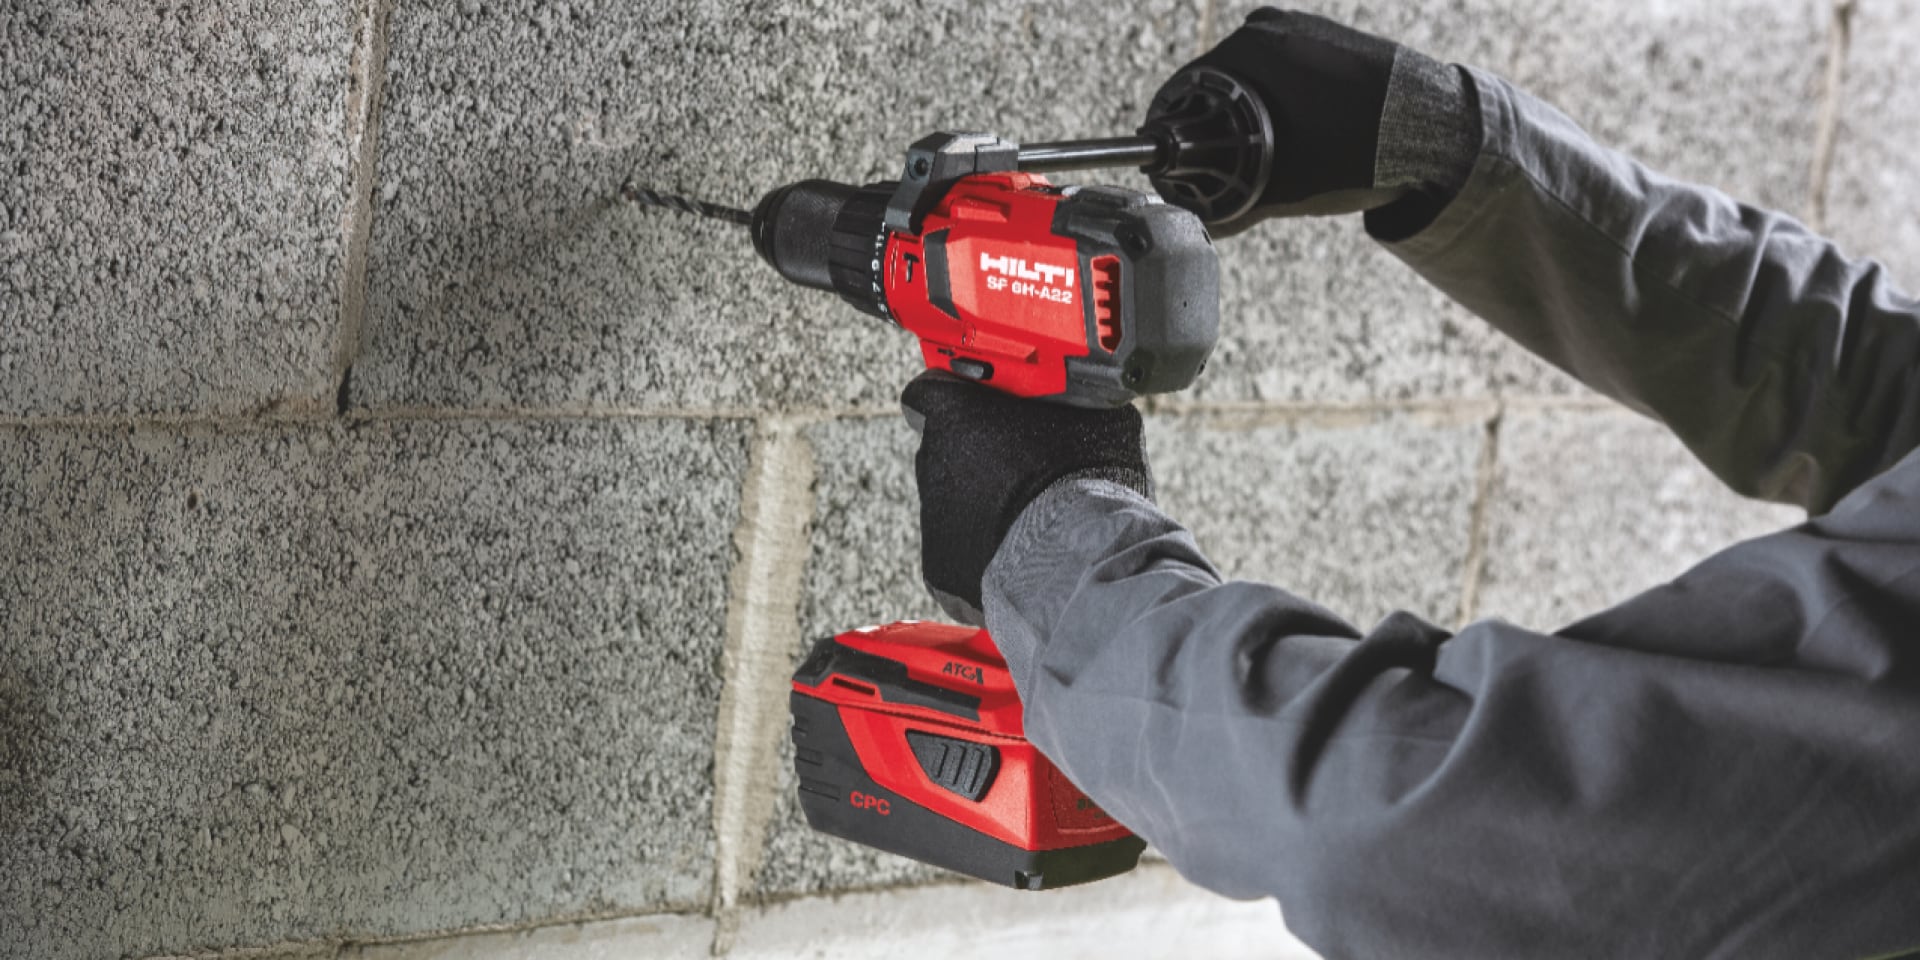 High performance hammer drilling into masonry with the SF 6H-A22